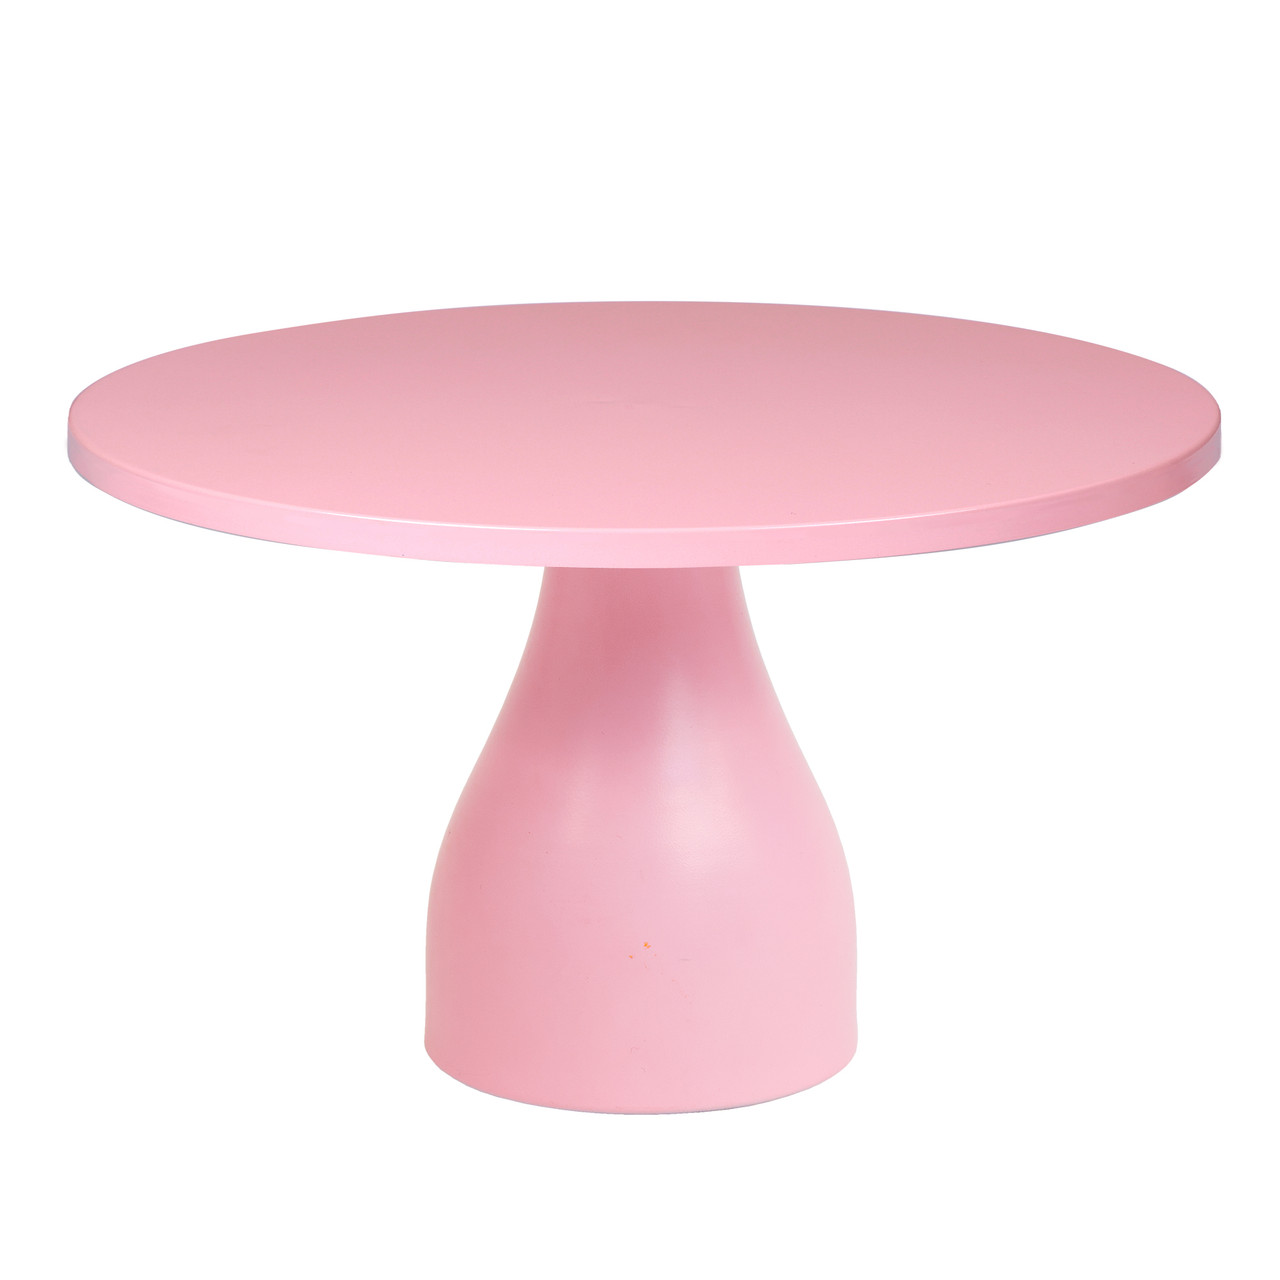 Holiday Time 2 Tier Serve Round Cake Stand, 12 in L x 12 in W, White -  Walmart.com